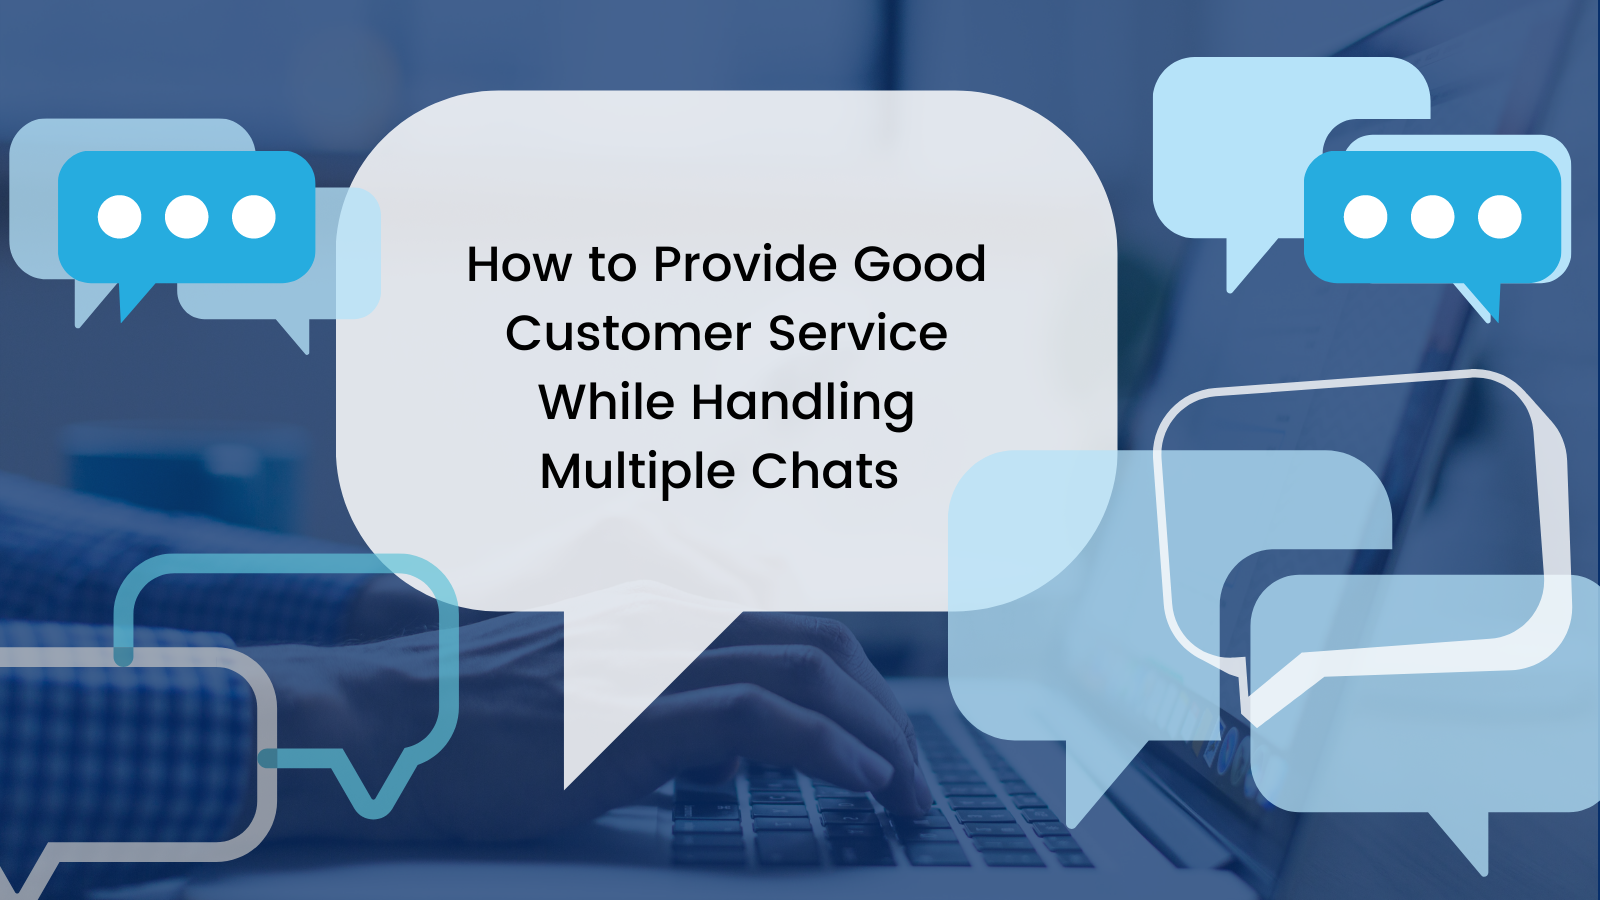 How to Provide Good Customer Service While Handling Multiple Chats